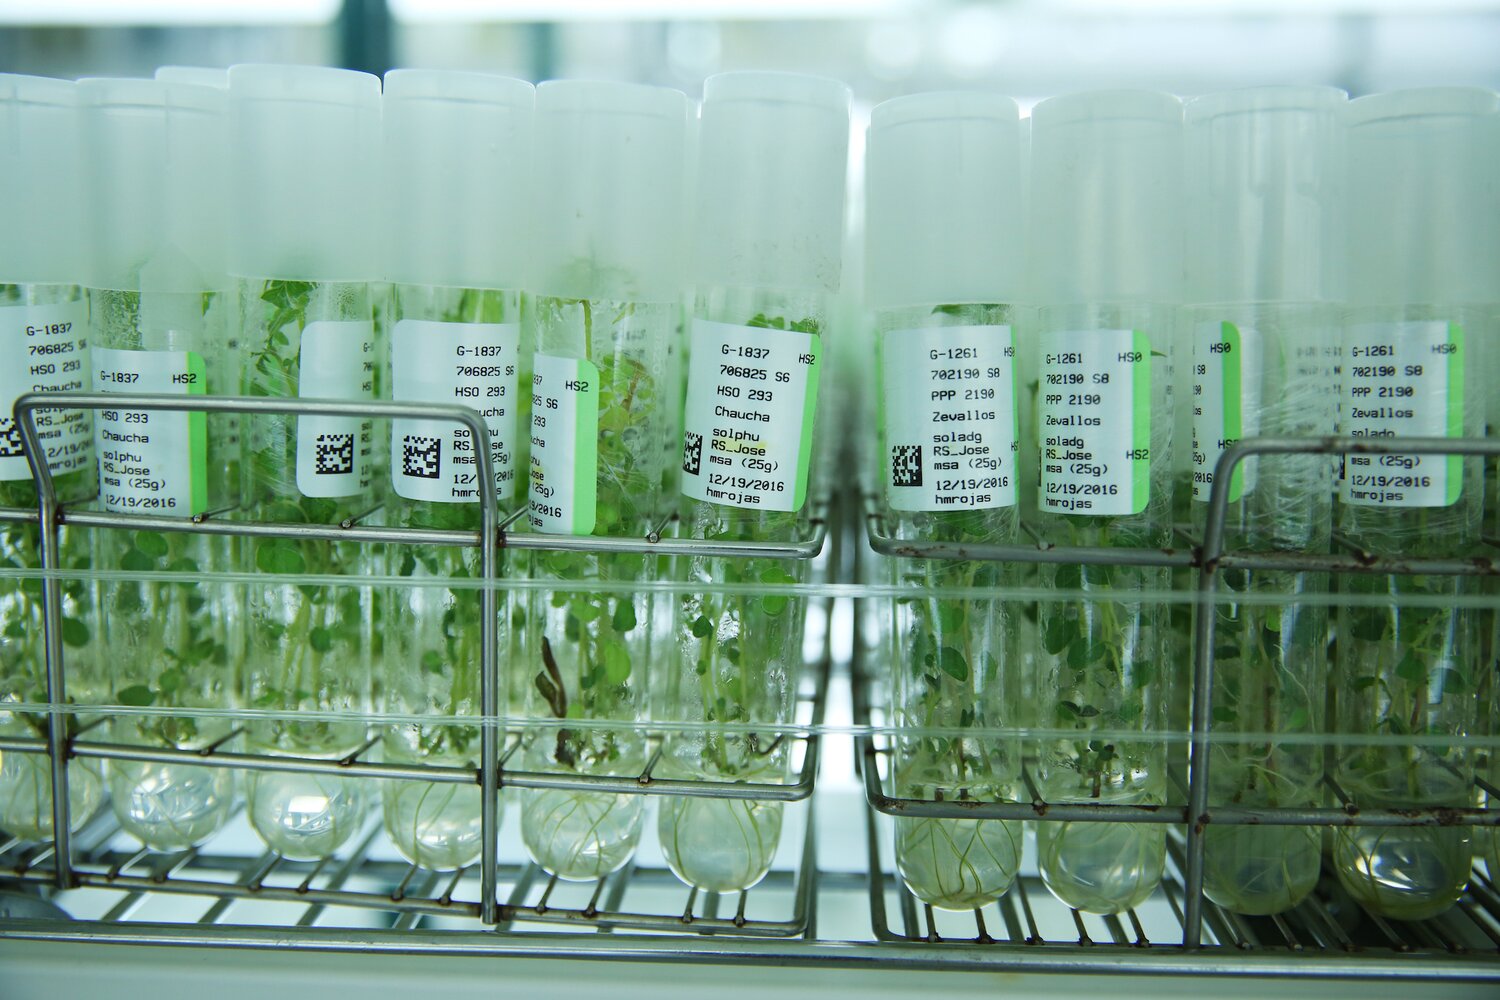 Potato in vitro cultures showing labels with bi dimensional barcoding (QR), identification data, health status, crop species, micropropagation date, culture media and propagator name.